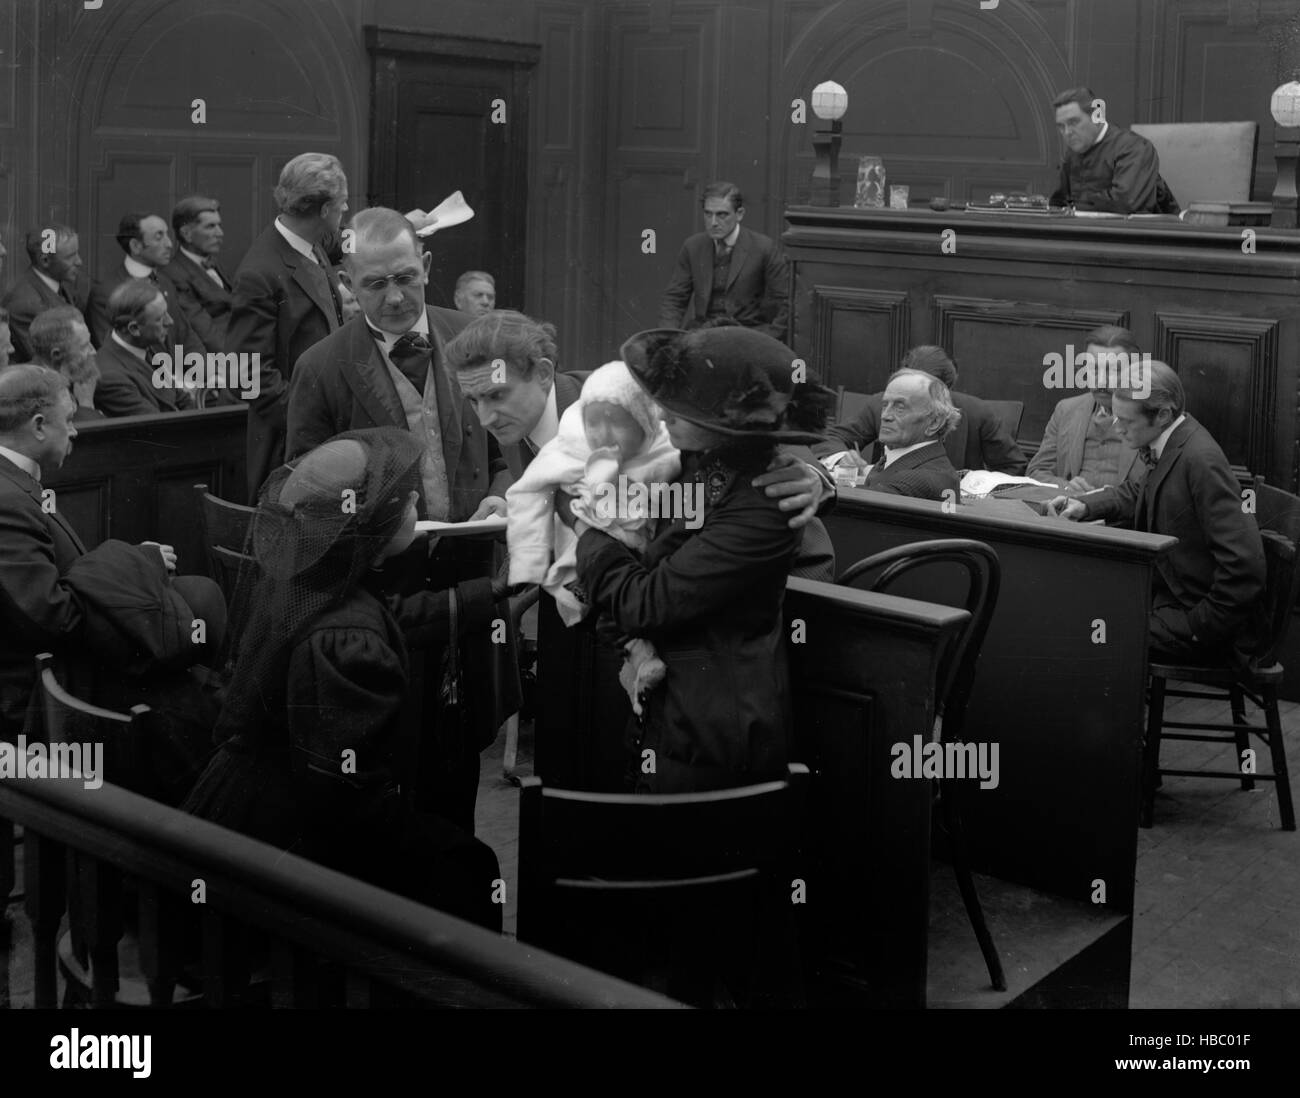 1910s 1920s DRAMATIC COURT ROOM SCENE SILENT MOVIE STILL - 01/01/1910 - Photo by: AMERICAN STOCK/H. Roberts Stock Photo